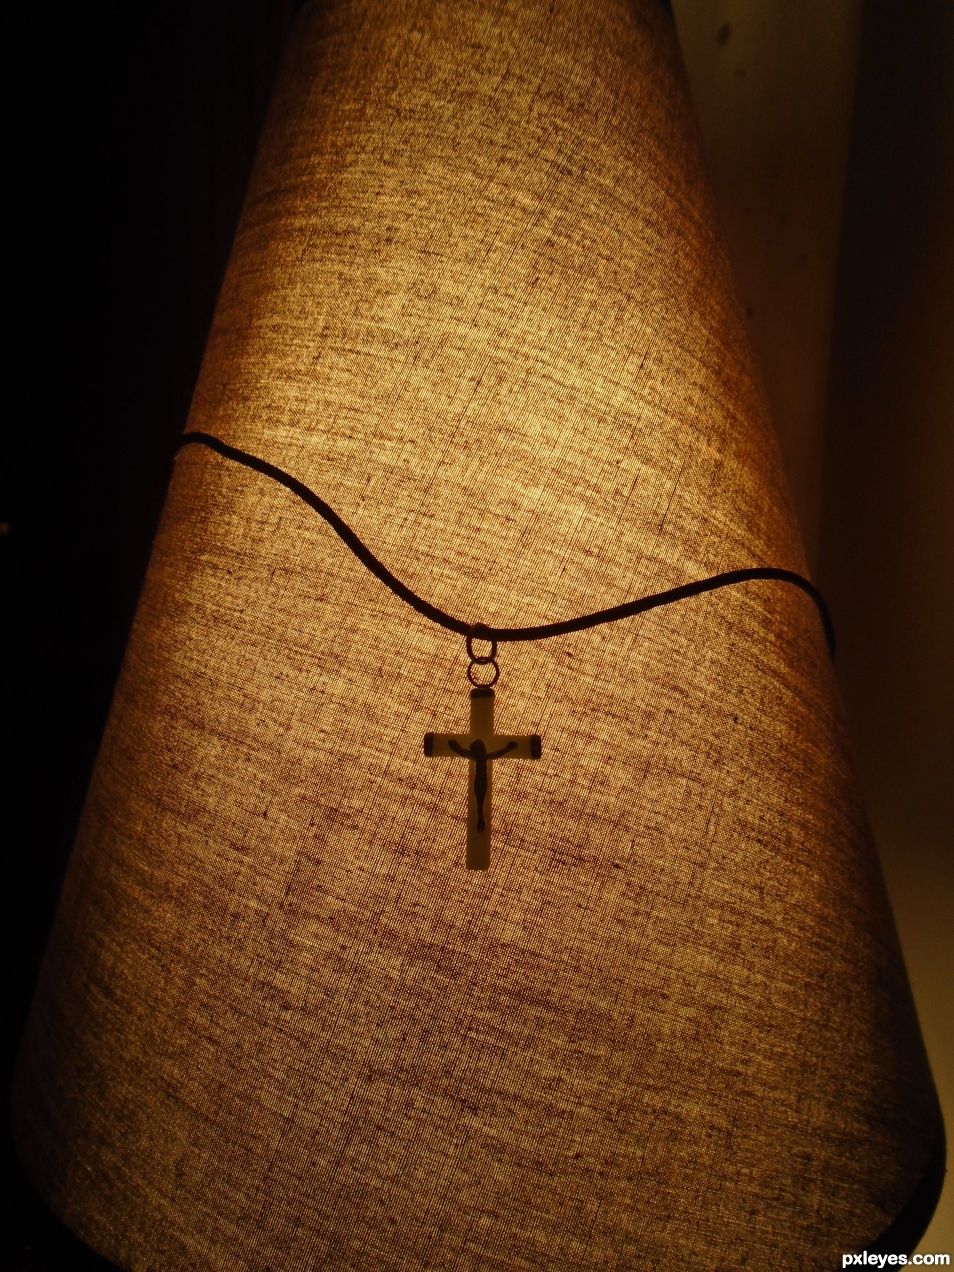 The Light of the Cross